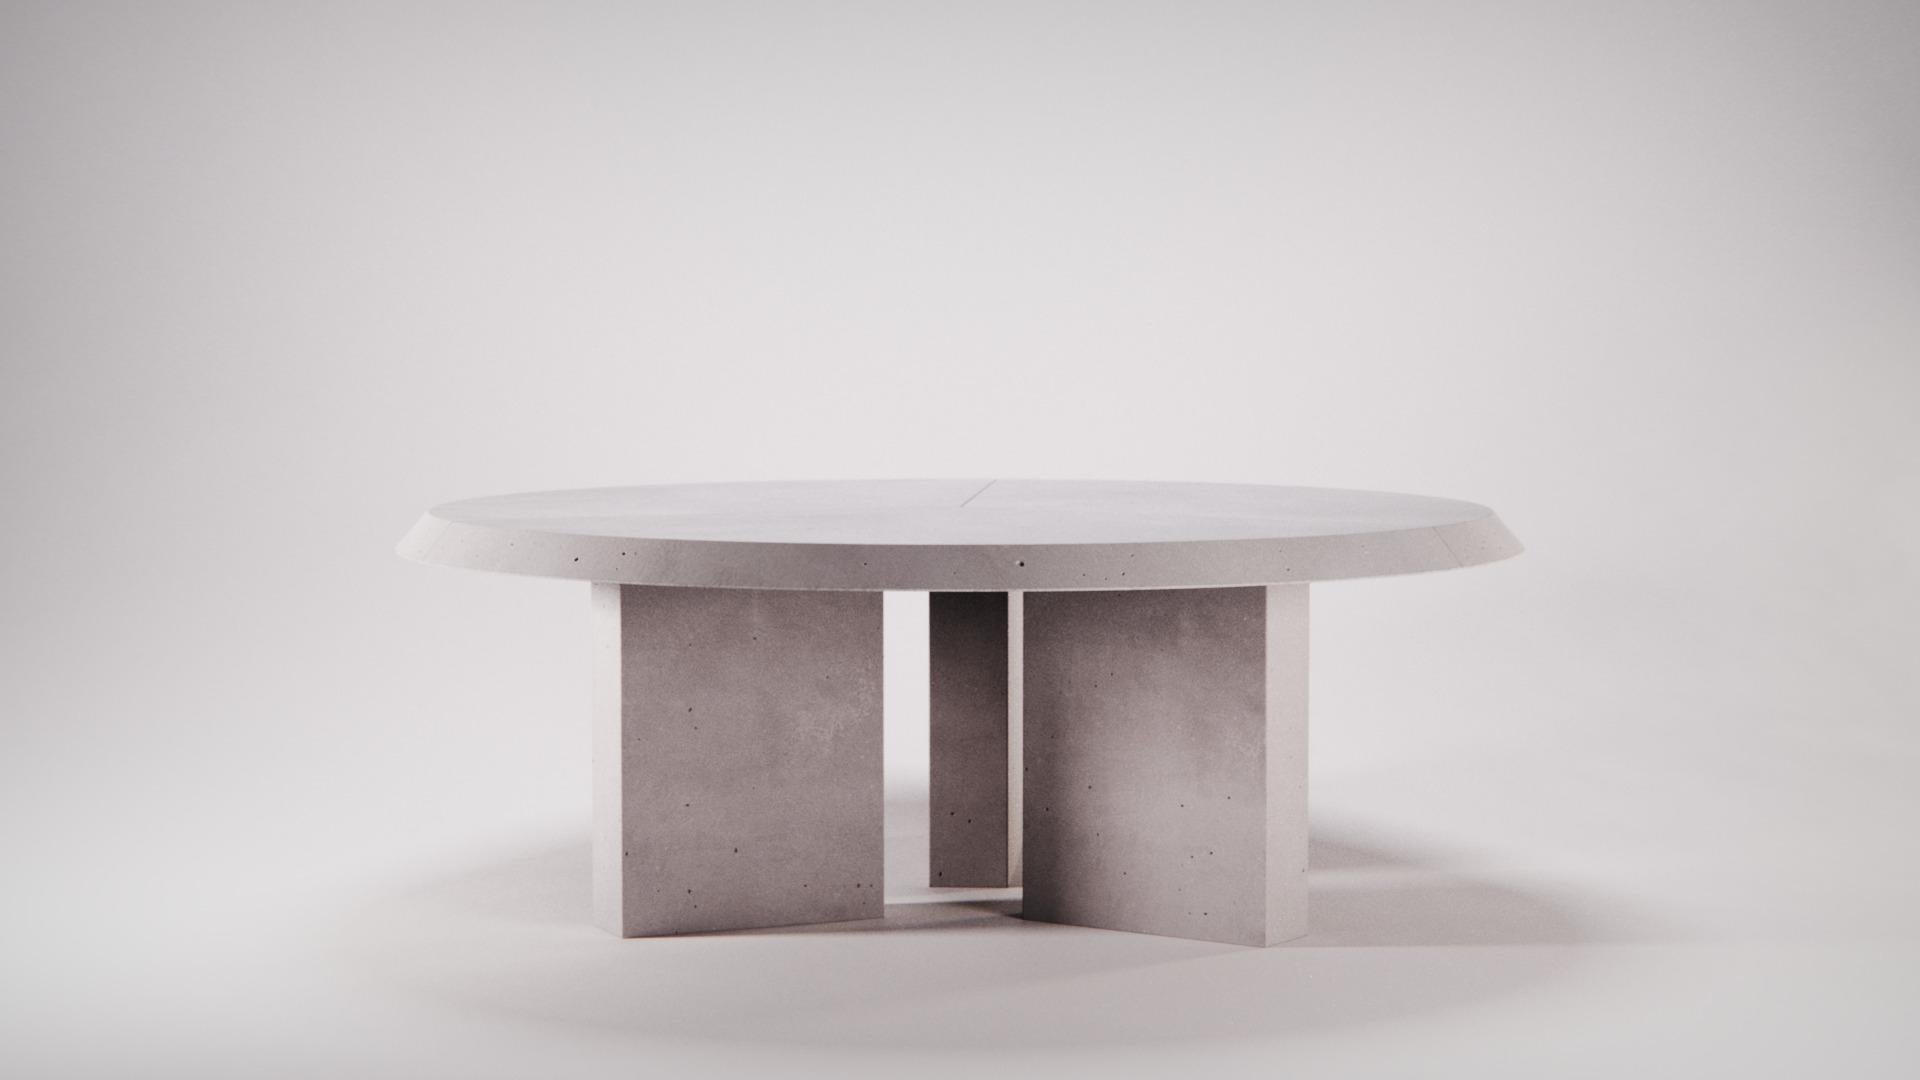 Laoban is a dining table which takes inspiration from the Asian aesthetic. Laoban was born from the desire to give importance and stability to the convivial moments that we savor every day. Strongly inspired, in the circular shape and in the